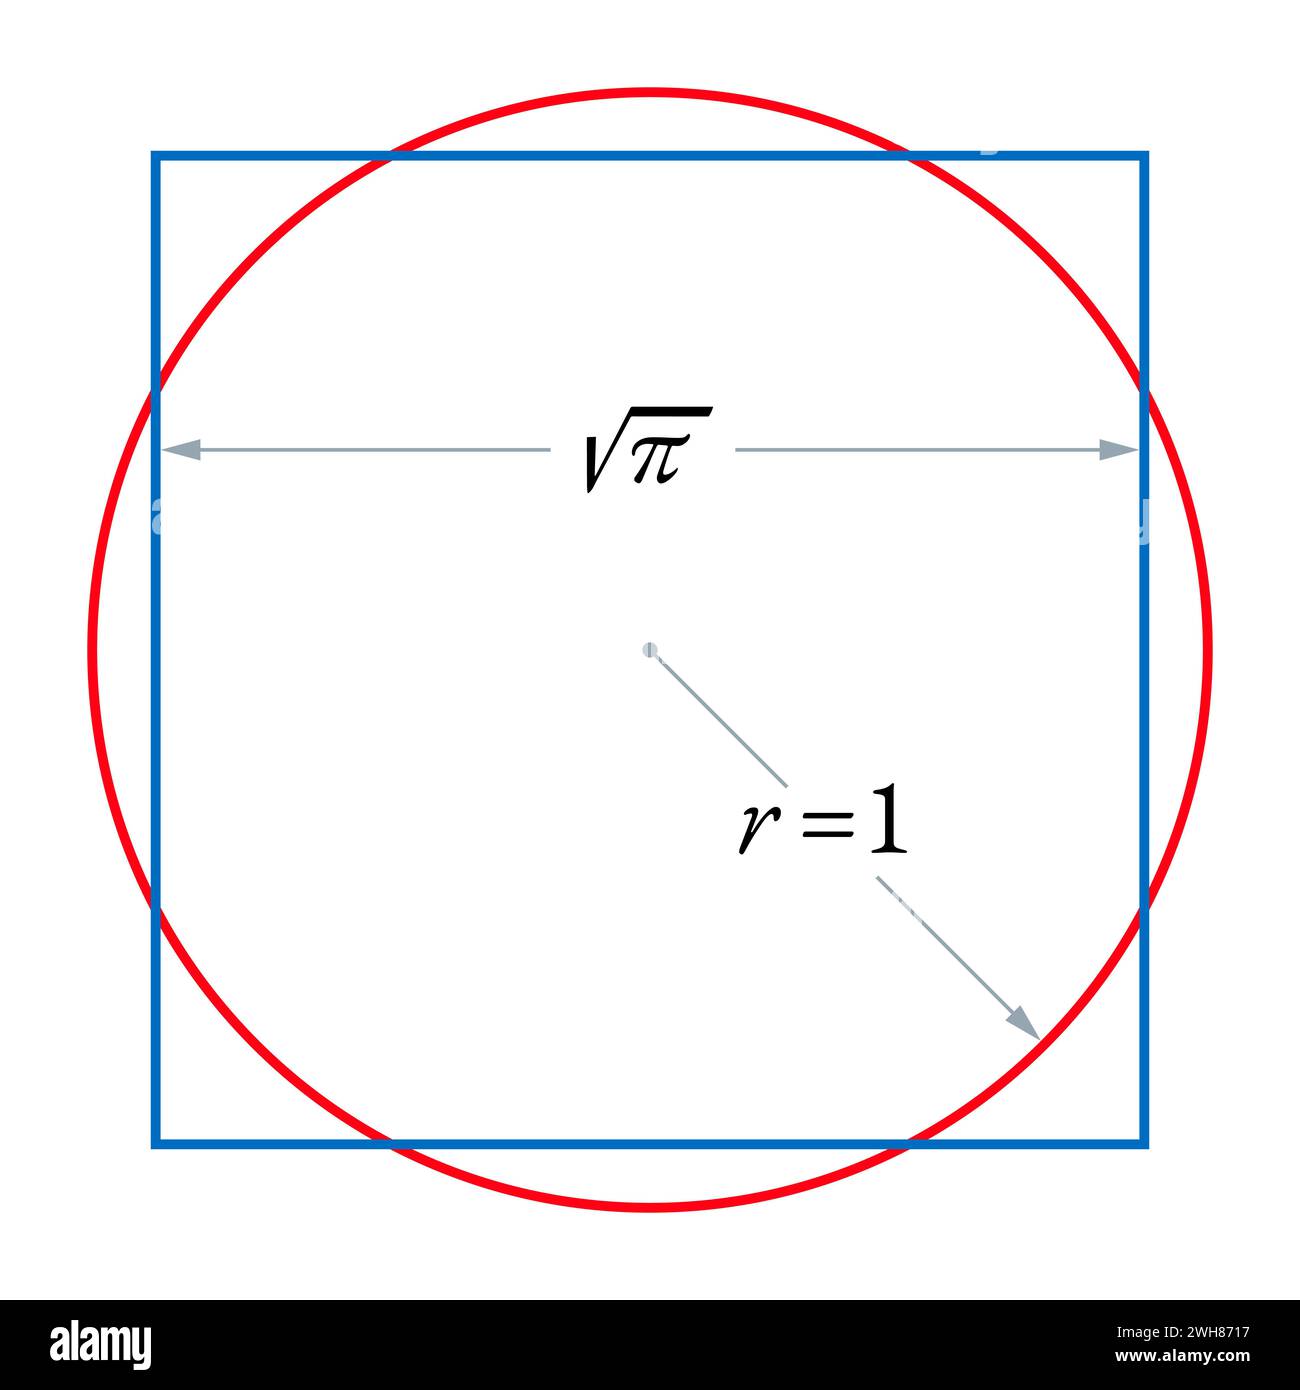 Squaring the circle or also quadrature of the circle. The challenge of constructing a square with the area of a given circle. Stock Photo